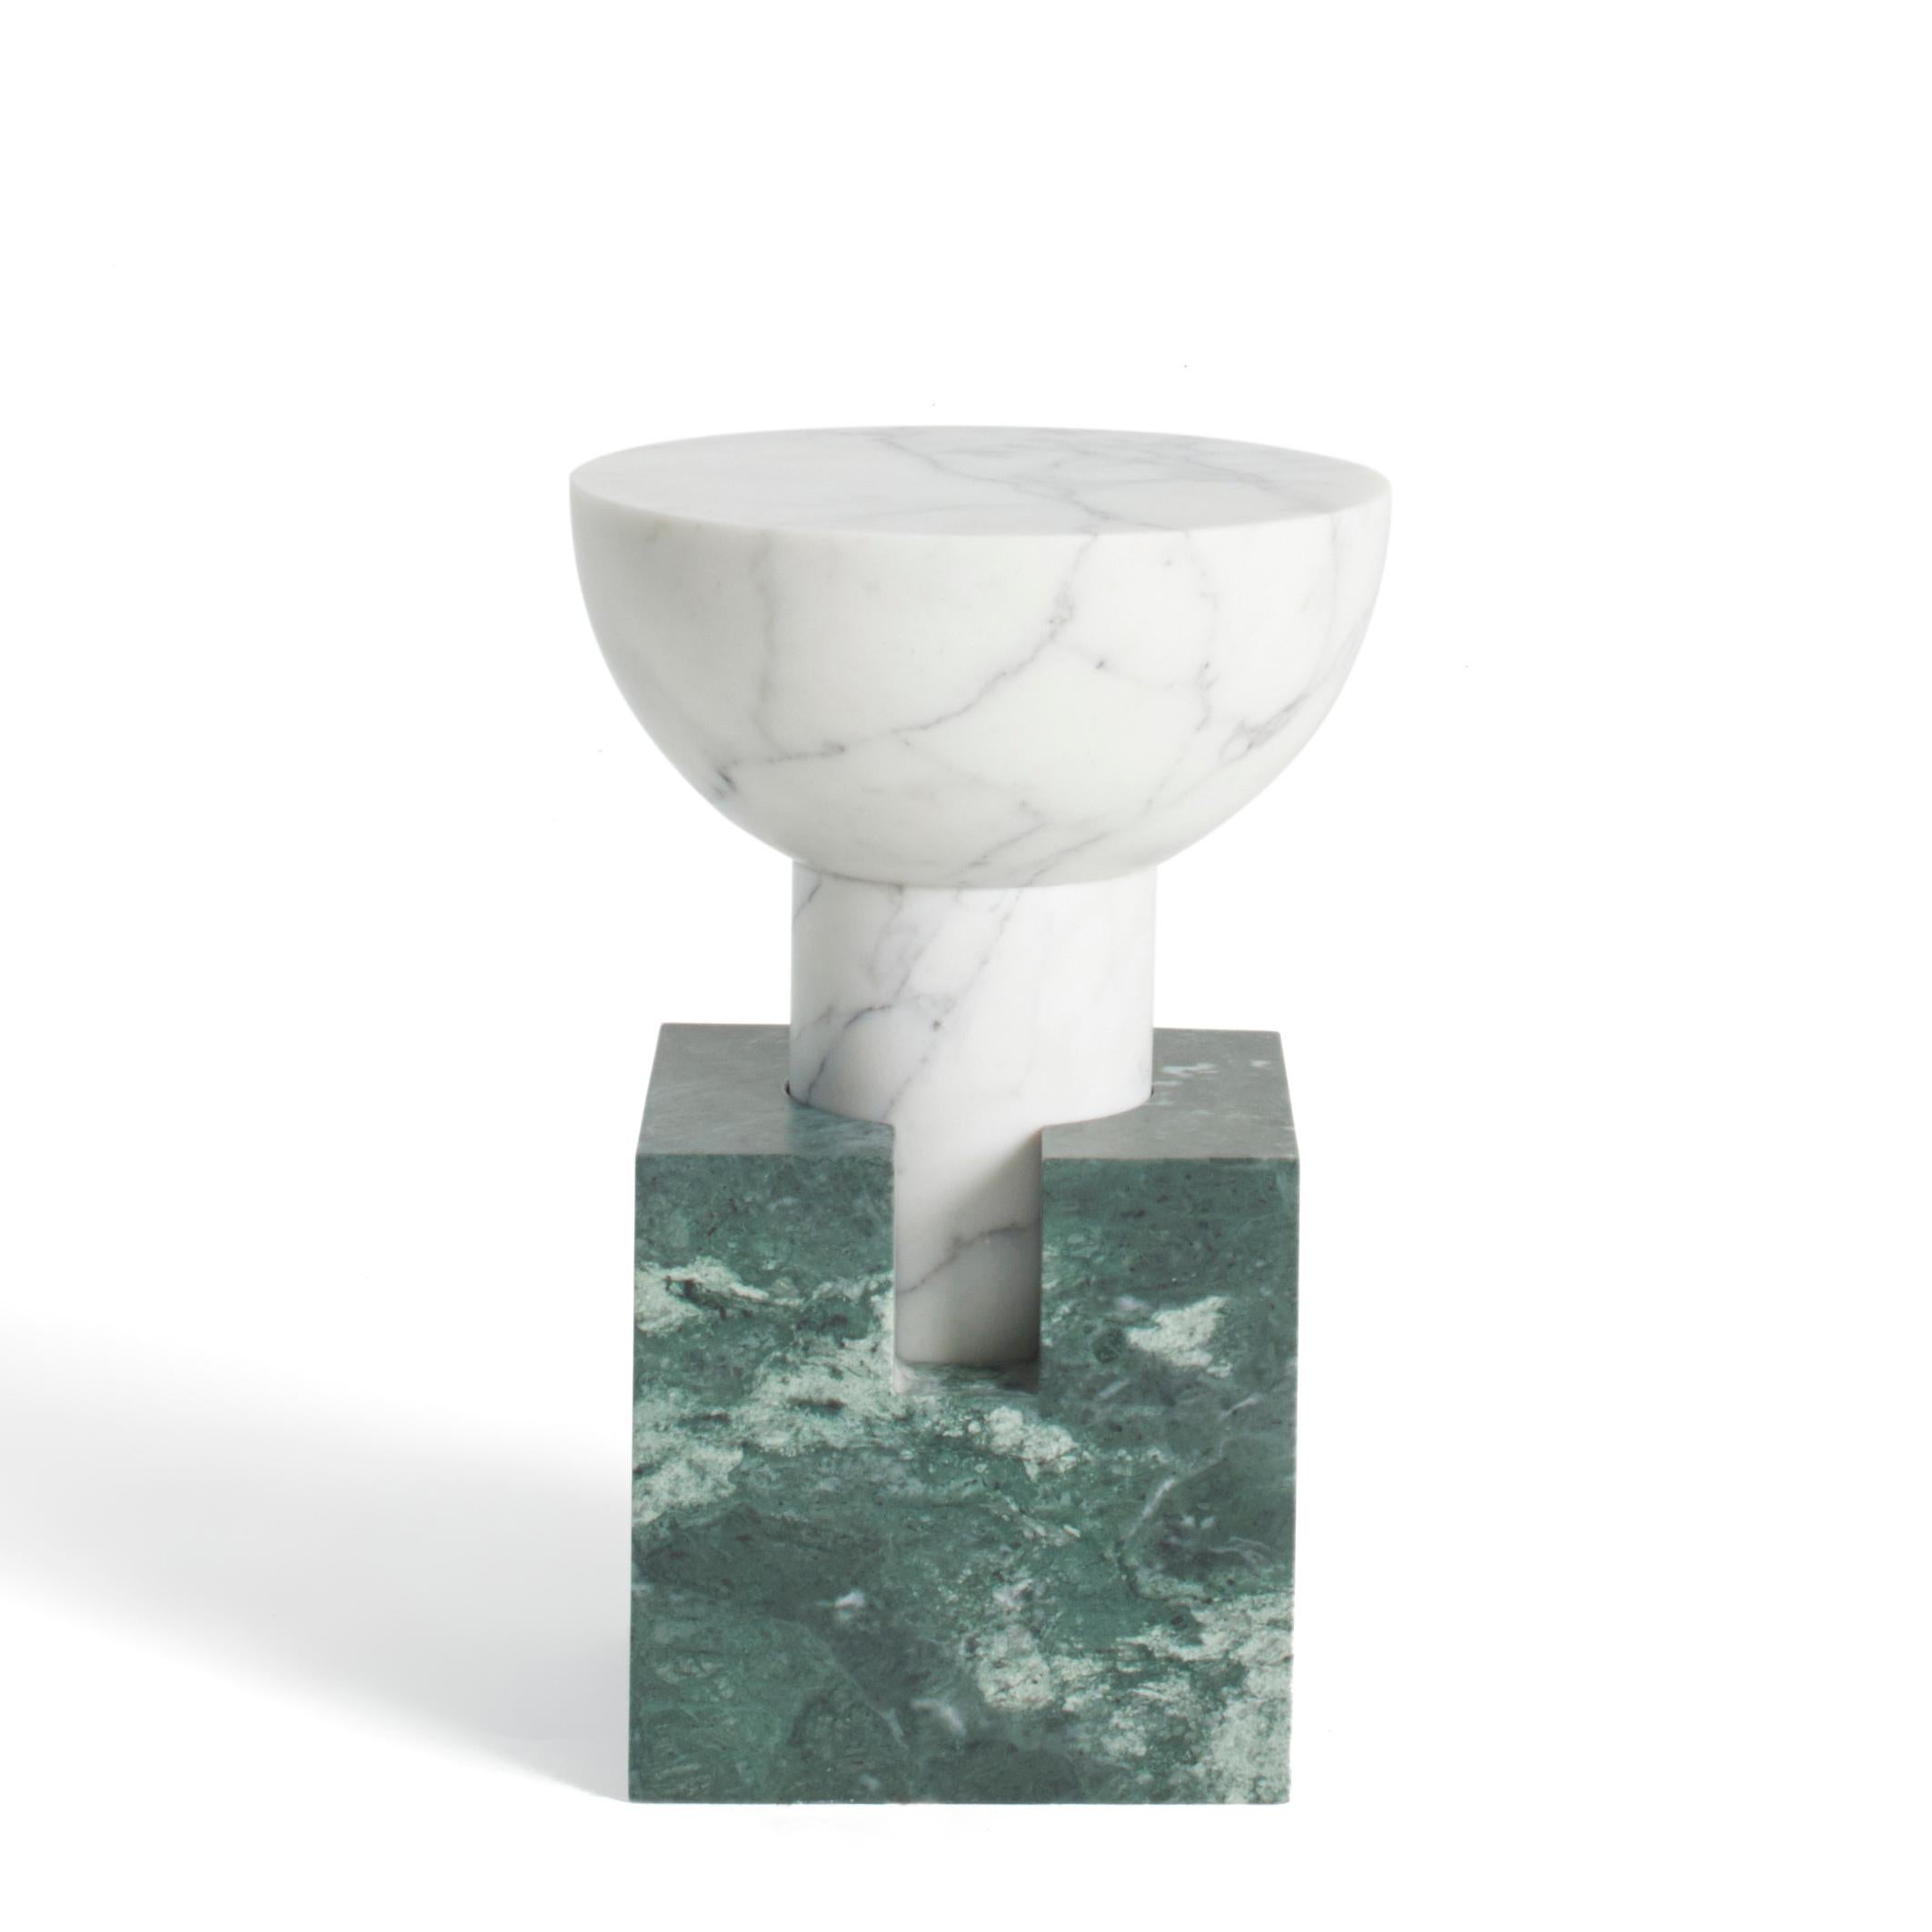 Green block side table by Anna Karlin
Dimensions: ? 30.4 x 23.5 x 45.7 cm
Materials: Marble

Born in London, Anna attended Central St. Martins School and Glasgow School of Art. Trained in visual communication, she is a self-taught product